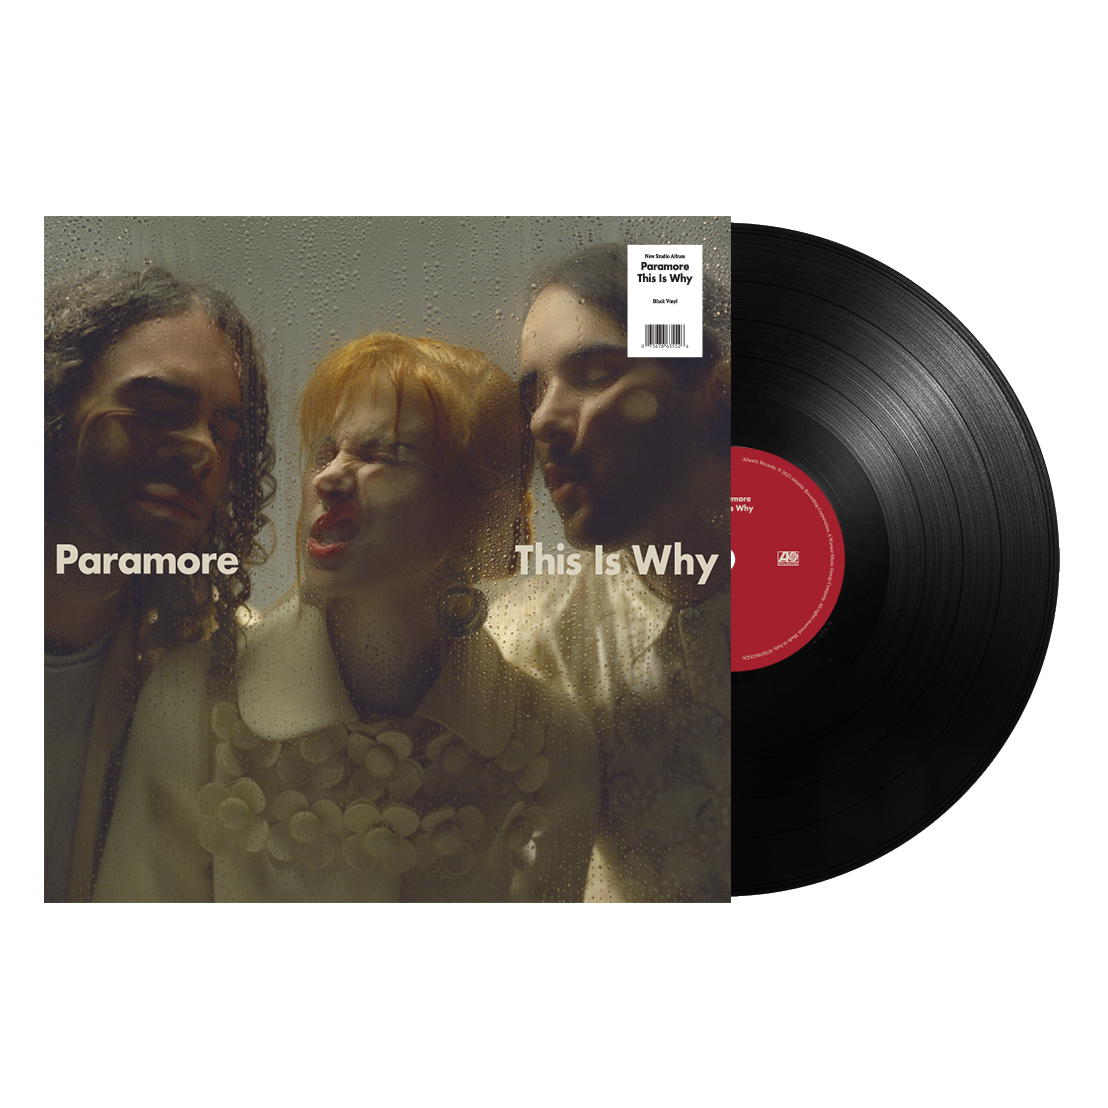 Paramore 'This Is Why' LP